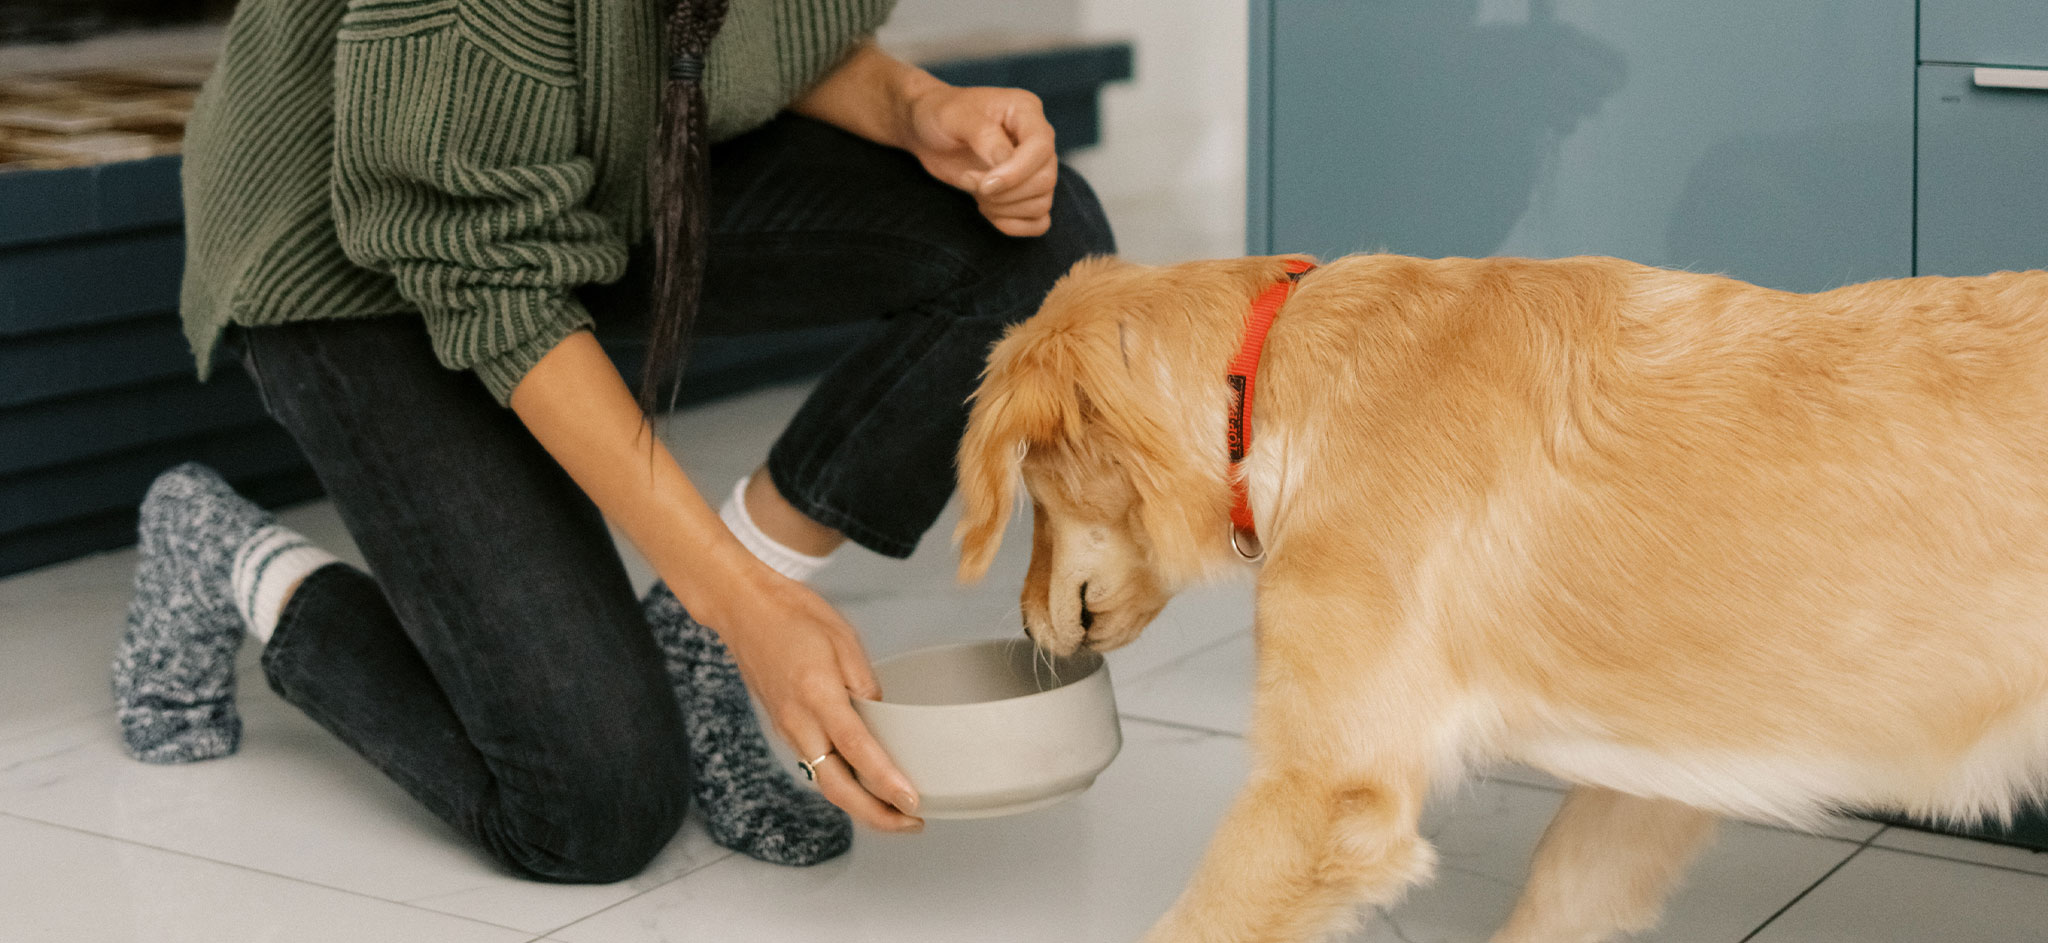 Wellness wet dog food recipes are thoughtfully crafted in a variety of crave-worthy flavors and textures that your dog will love. Every recipe is made with high-quality ingredients to support whole-body health so that you and your dog can share a life of wellbeing together.